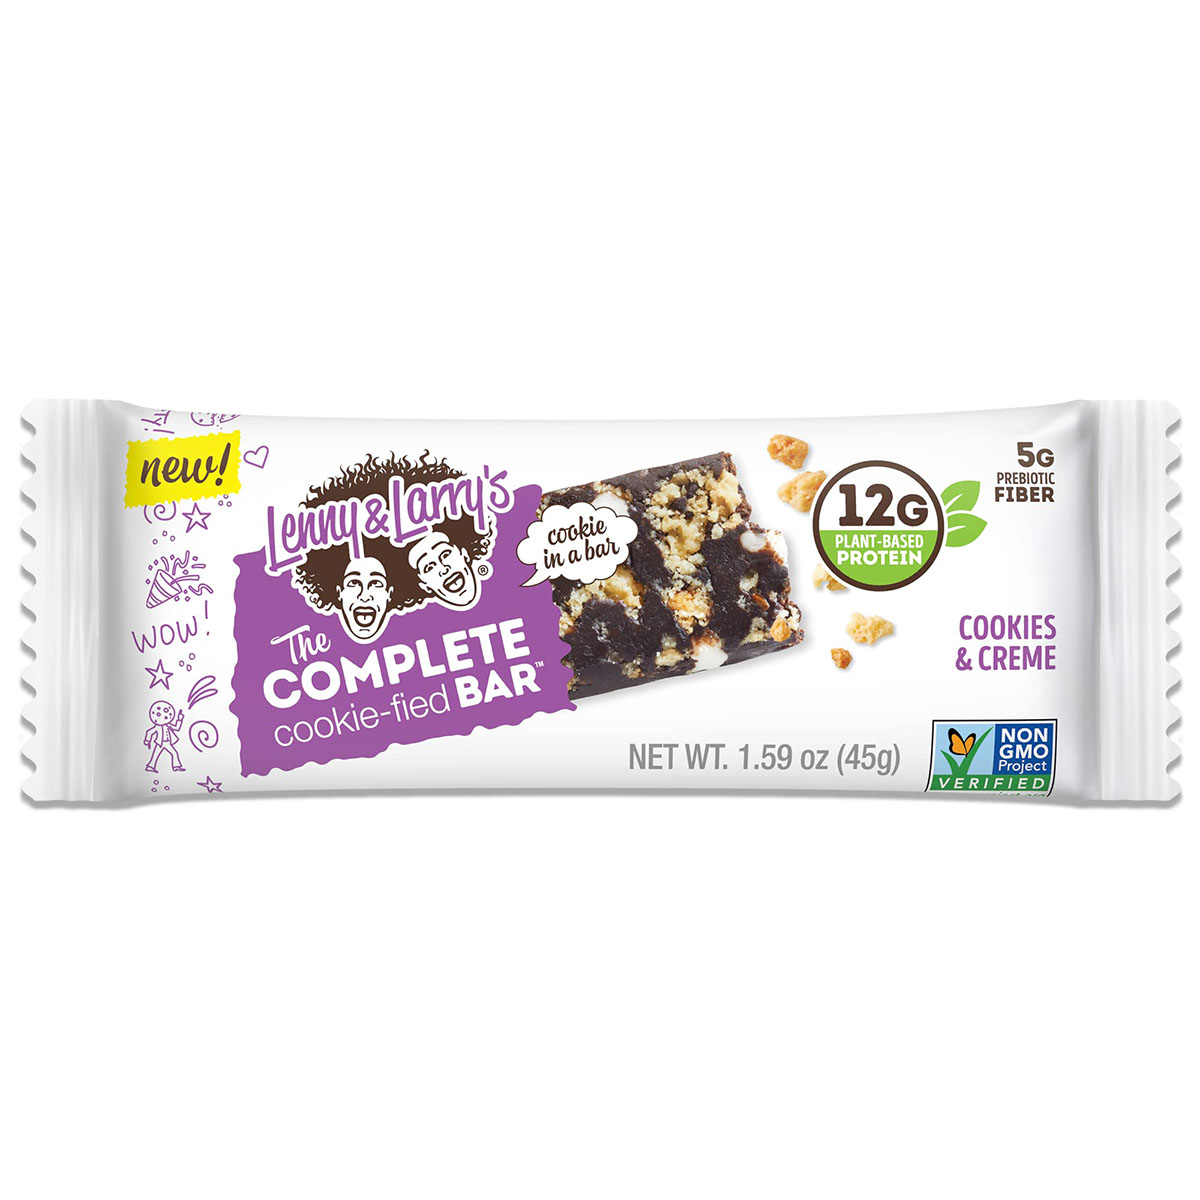 Lenny & Larry’s The Complete Cookie-fied Bar, 1 Bar, Cookies and Cream